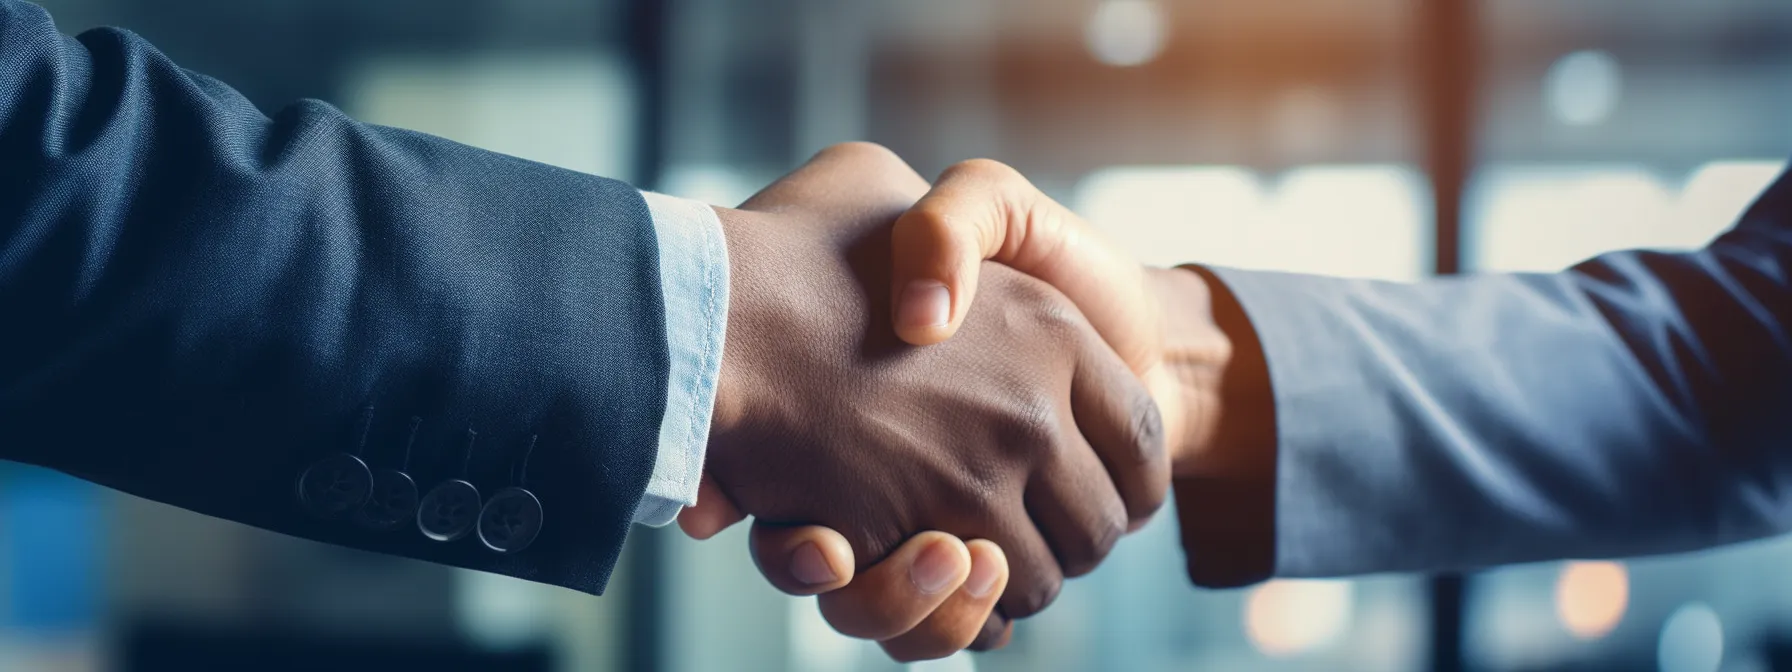 two business professionals shake hands and smile, signifying their commitment and agreement to work together towards a common goal.